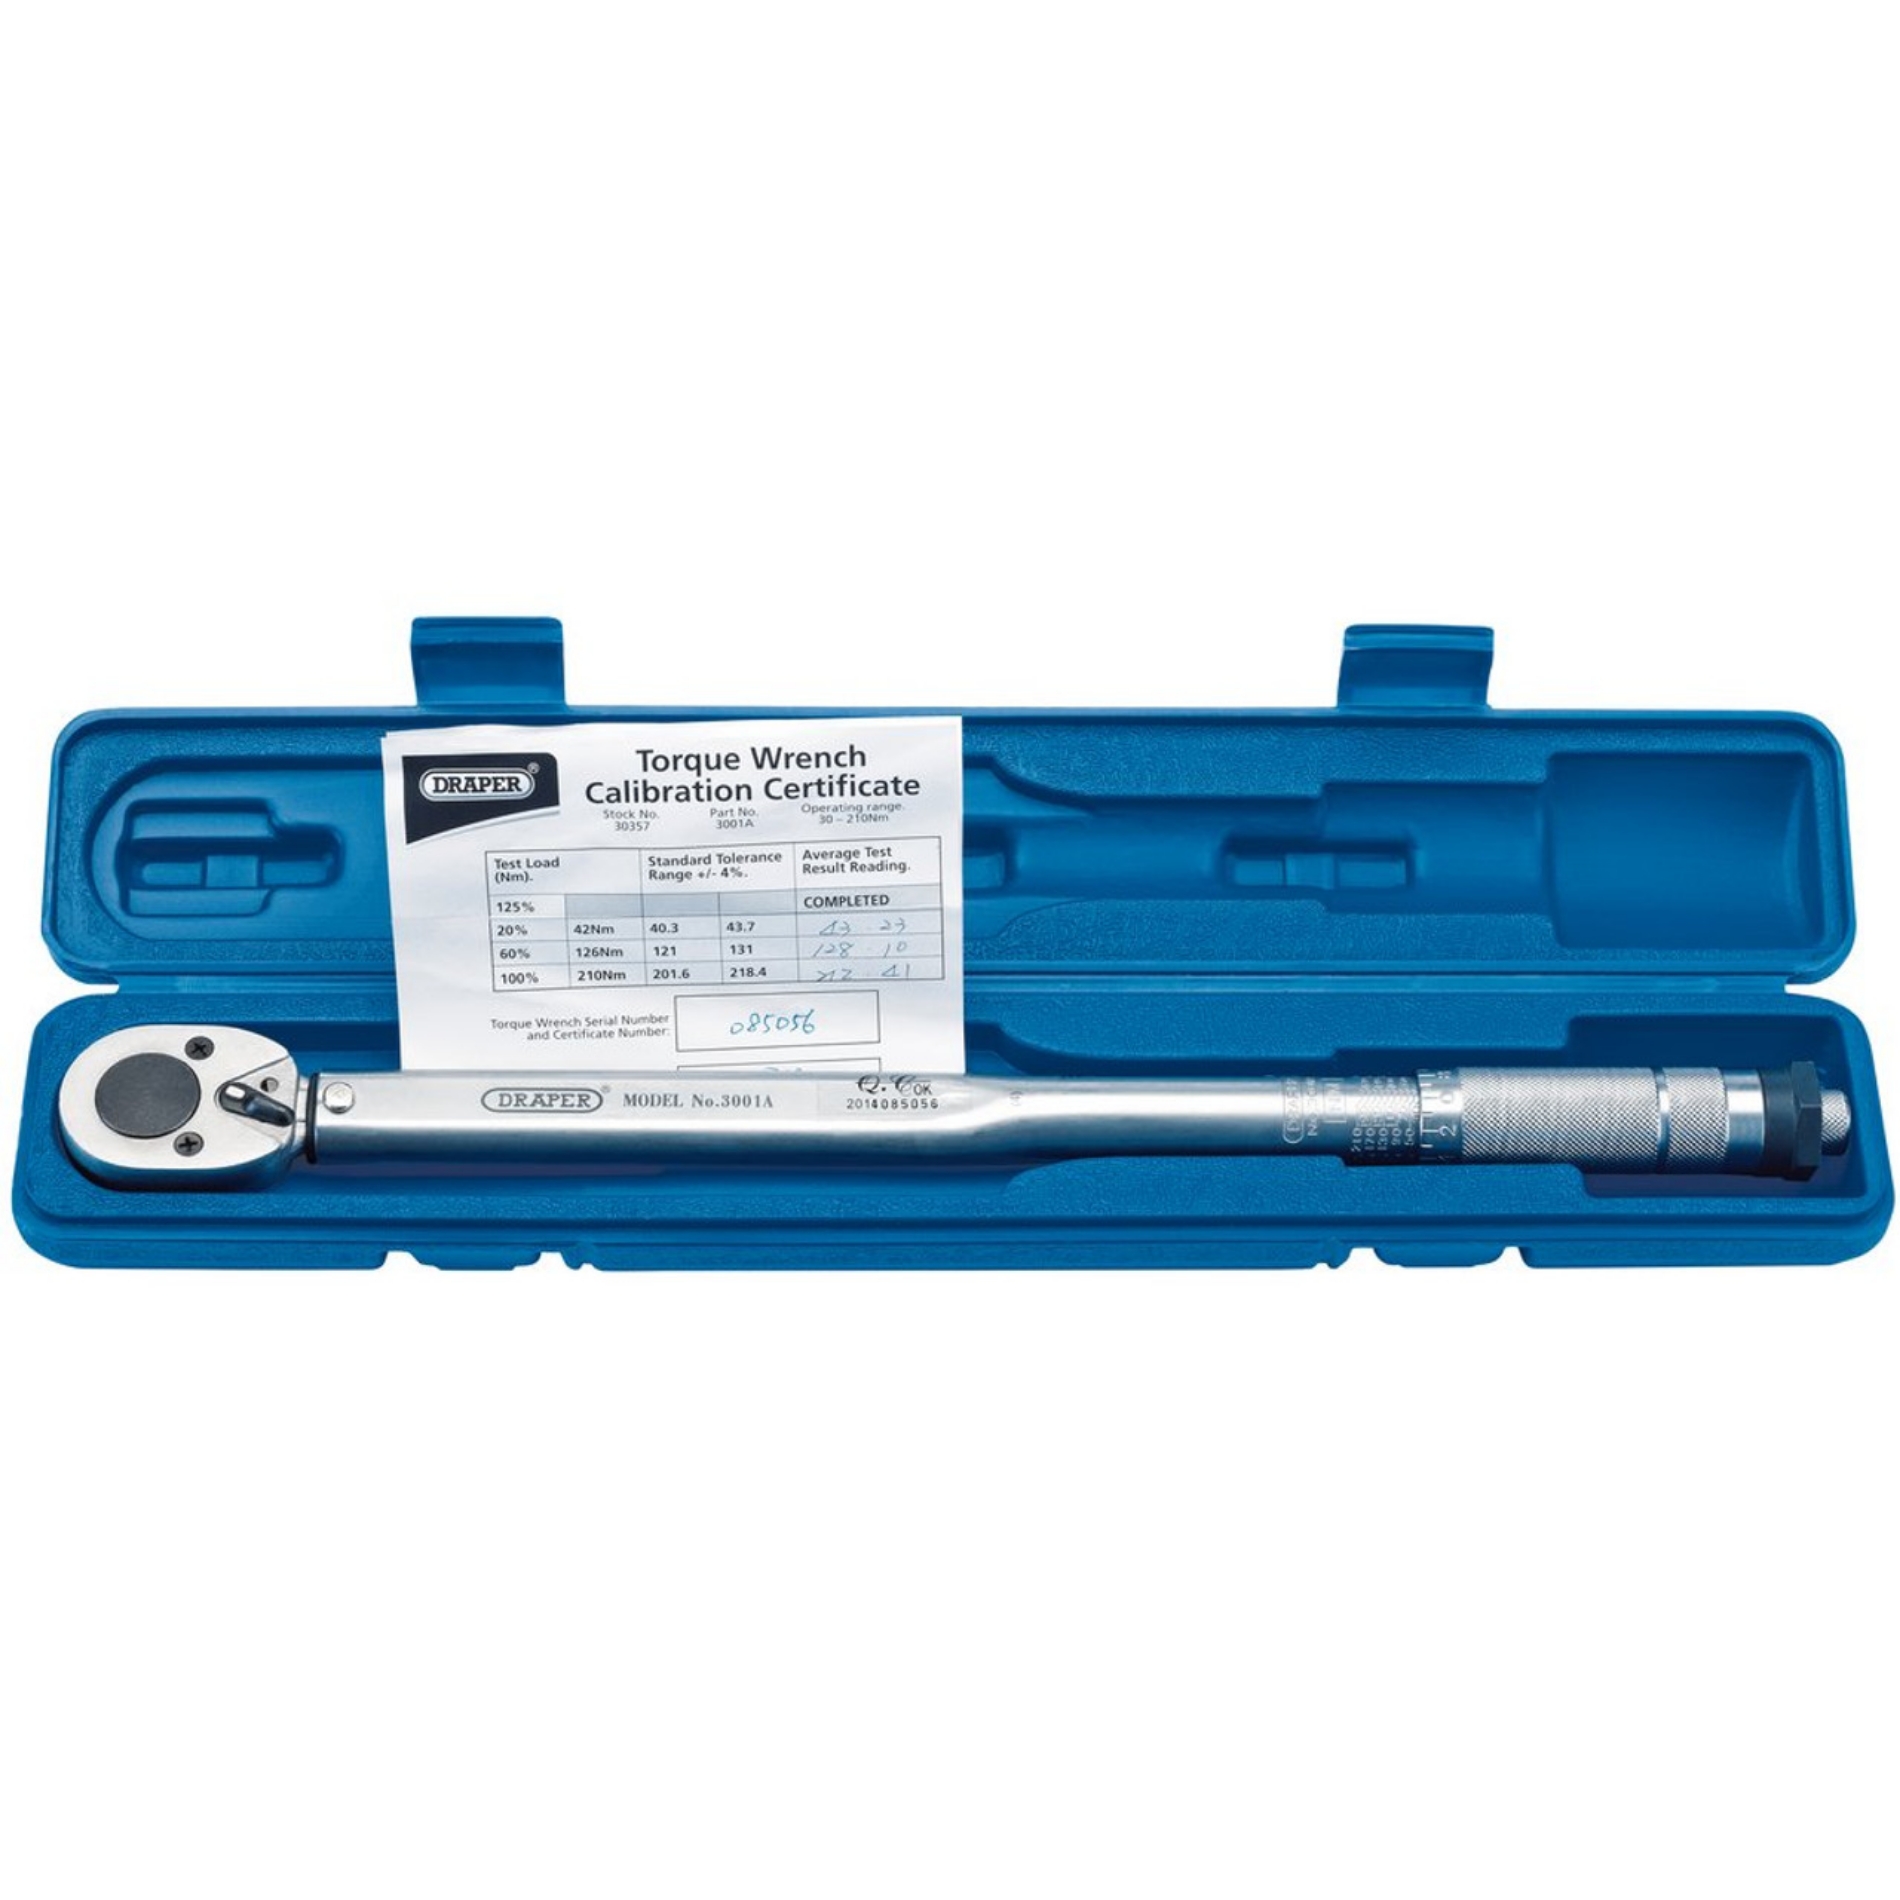 Picture of Draper Ratchet Torque Wrench, 1/2" Sq. Dr - 30-210Nm (465mm)